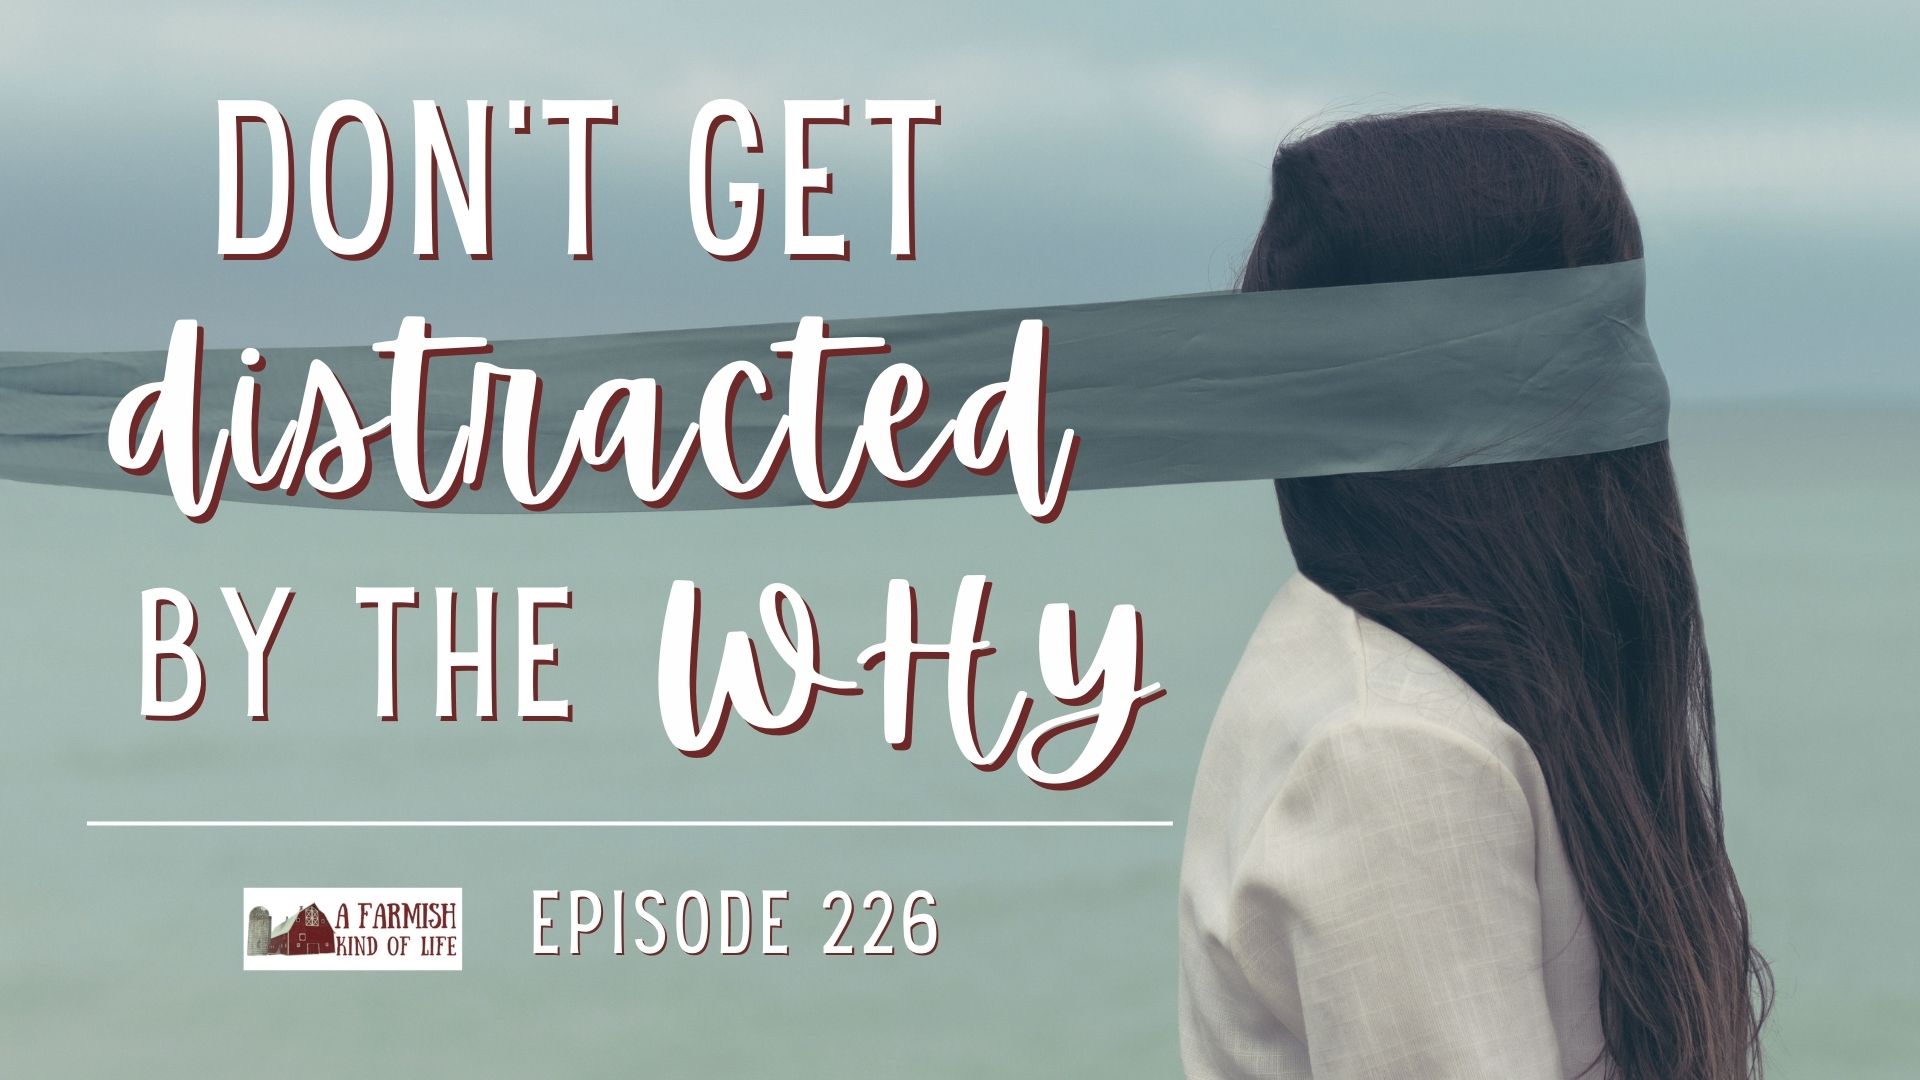 226: Don’t get distracted by the why